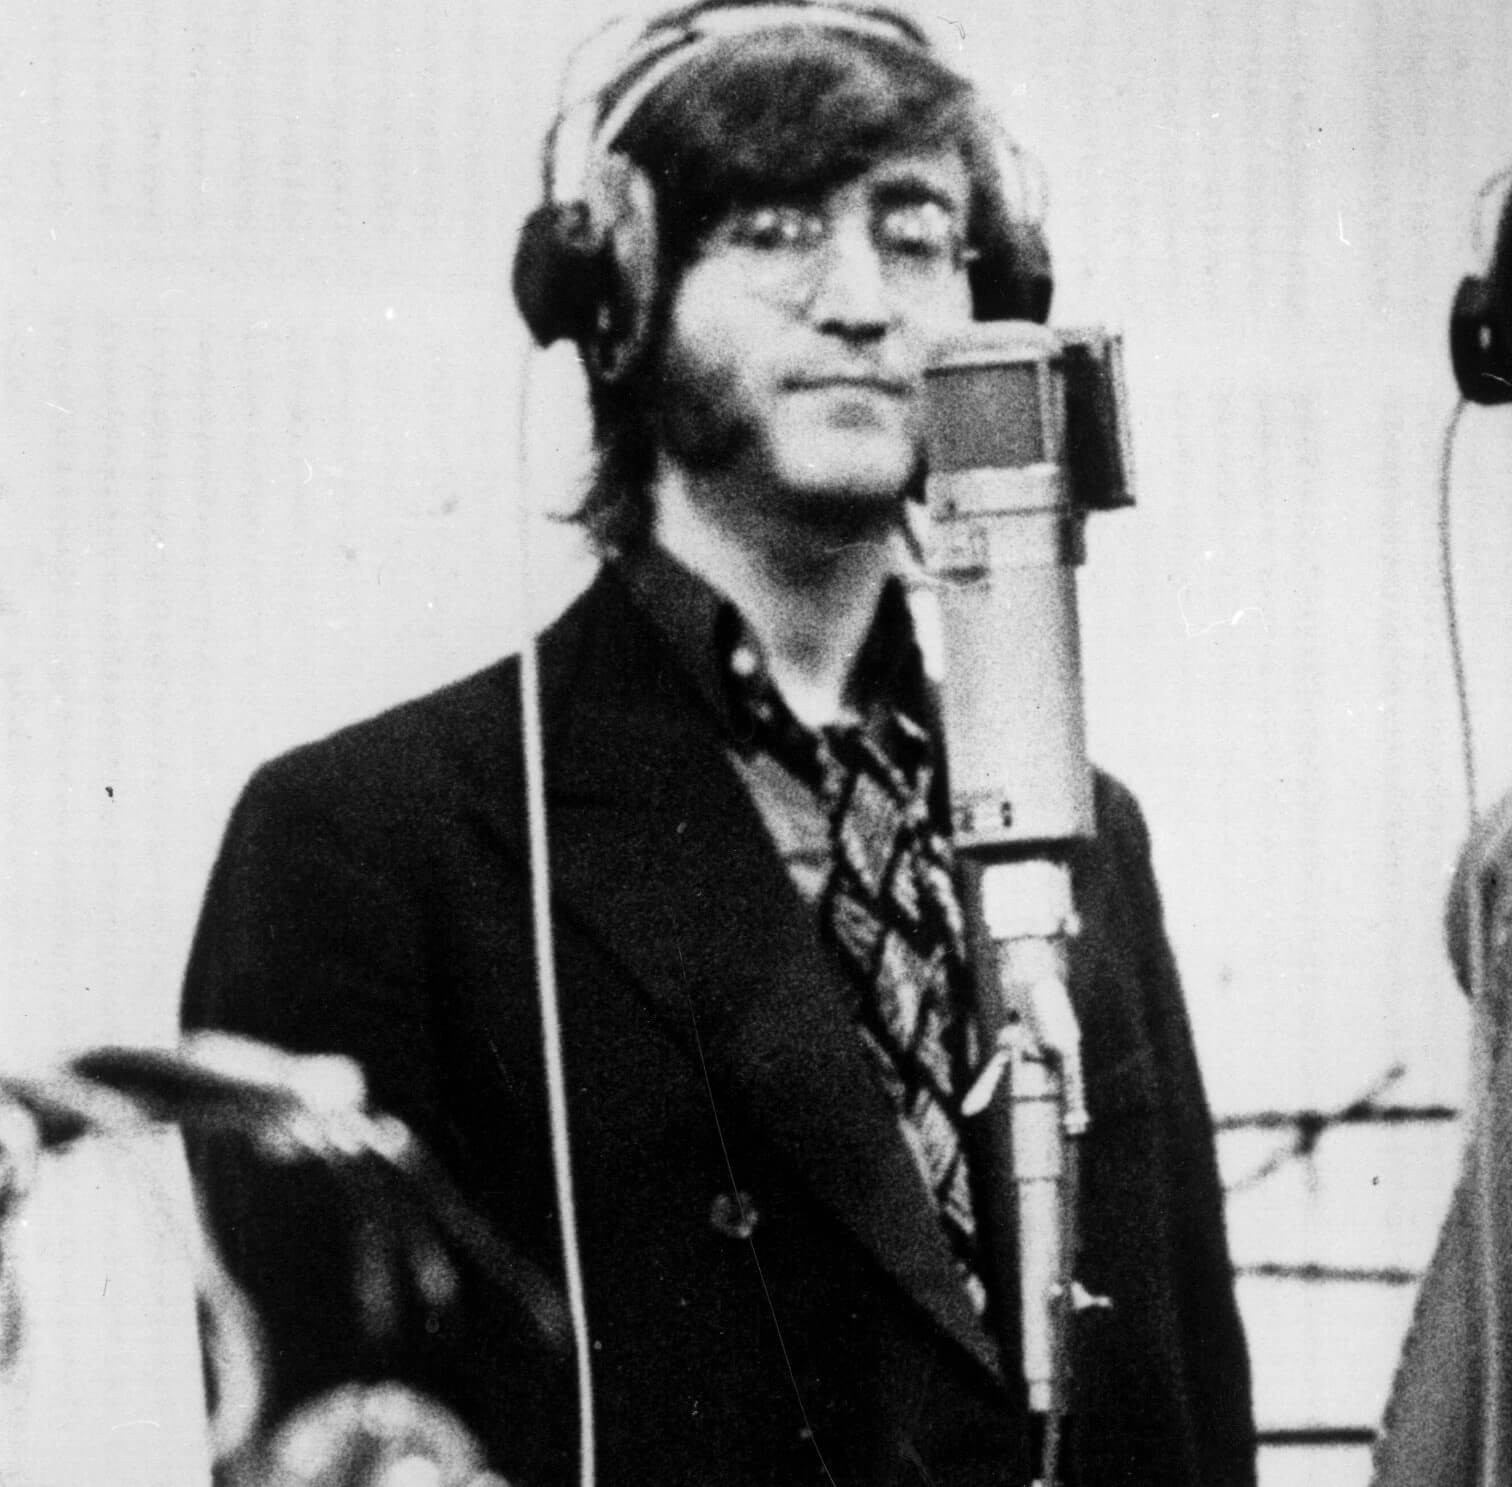 "Give Peace a Chance" singer John Lennon with a microphone